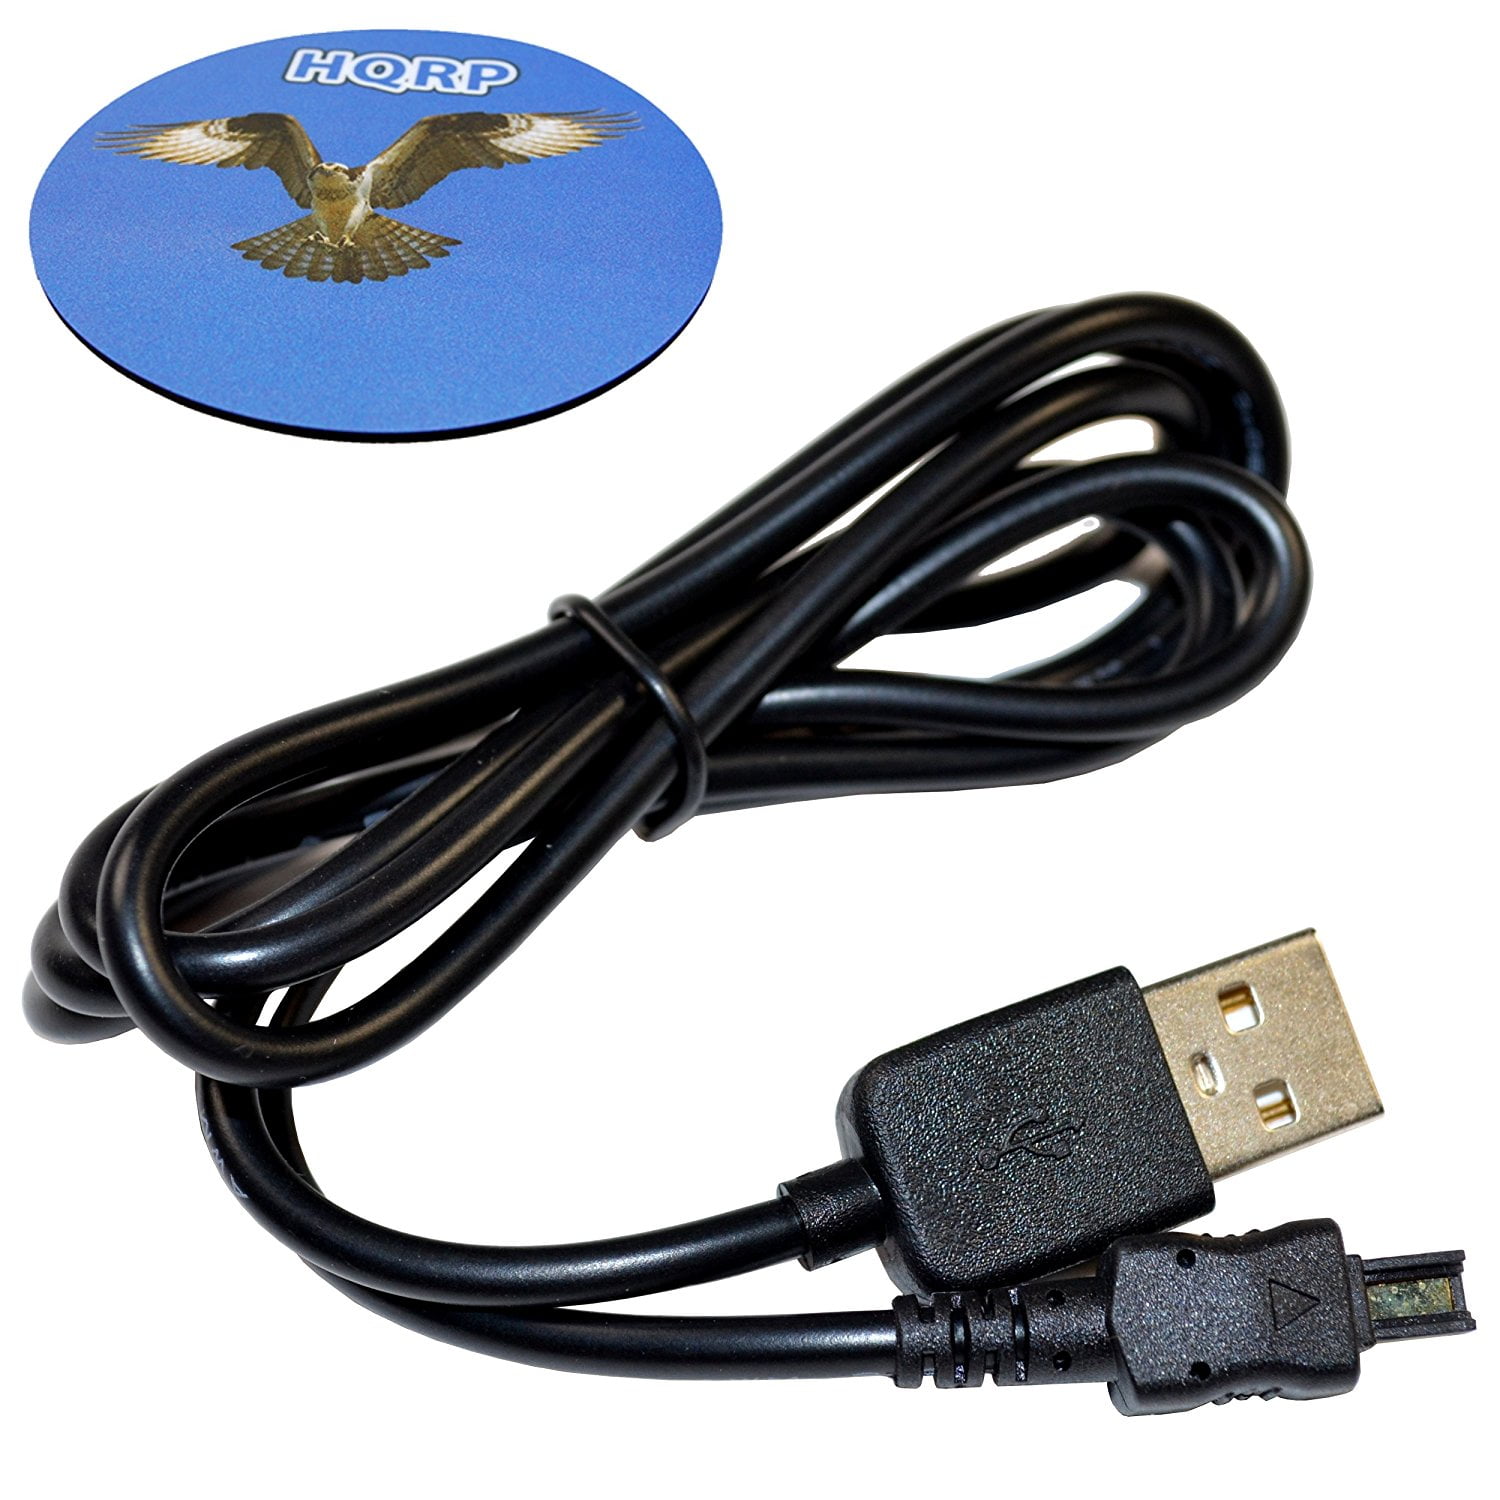 Replacement USB Data SYNC AV A/V TV Cable Cord for Nikon Coolpix L820 S210 L25 P7000 Nowak Technology 